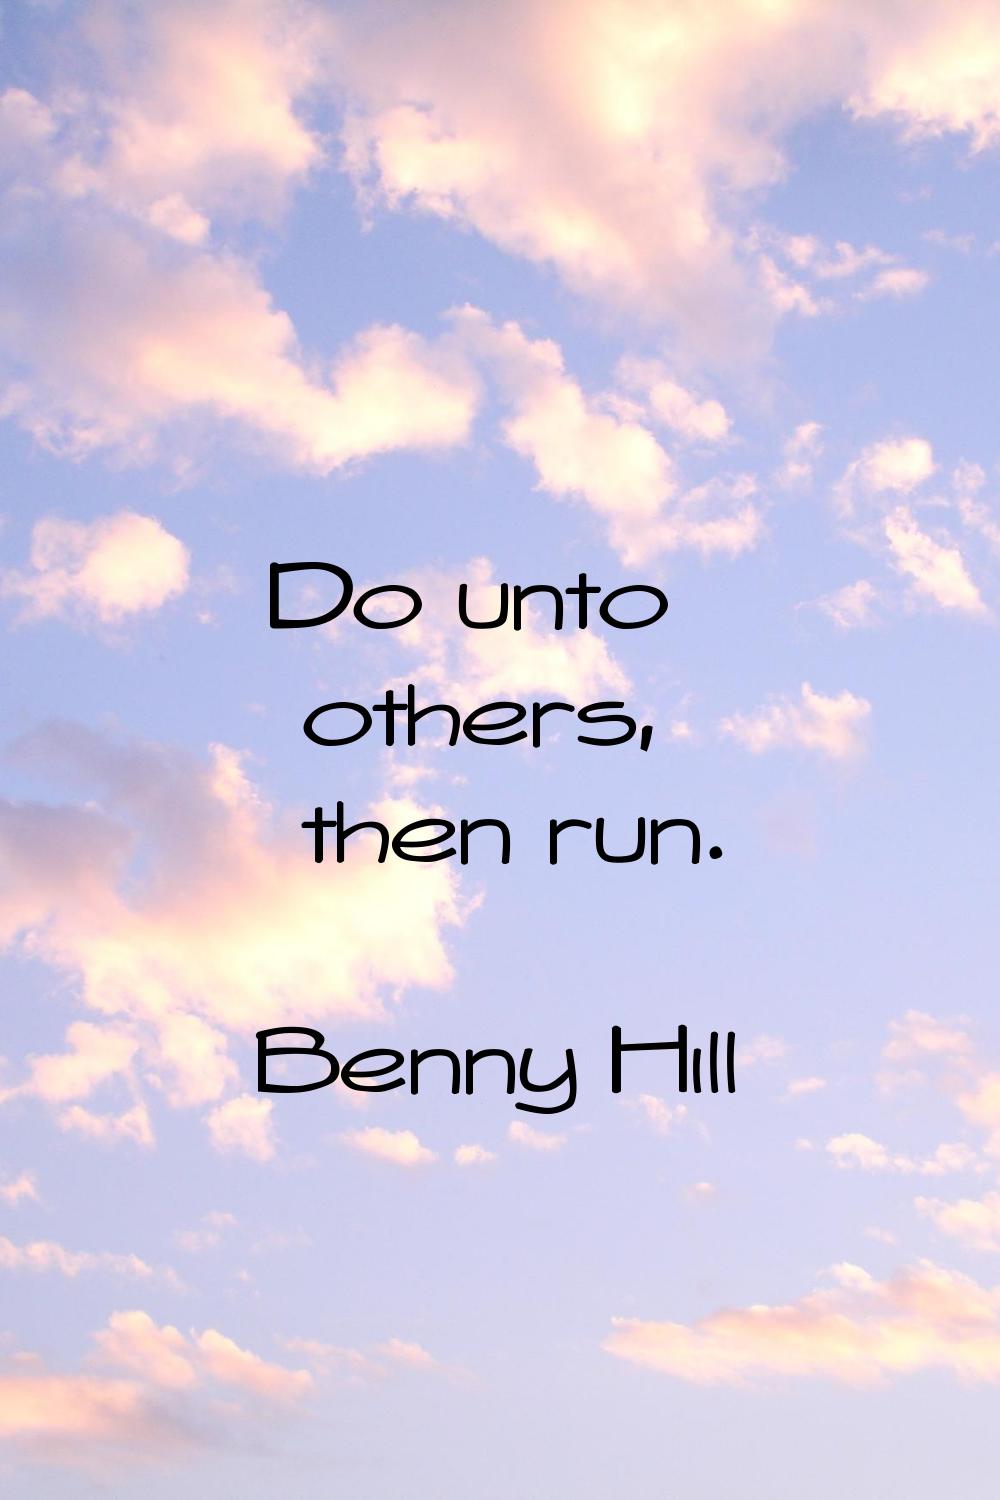 Do unto others, then run.